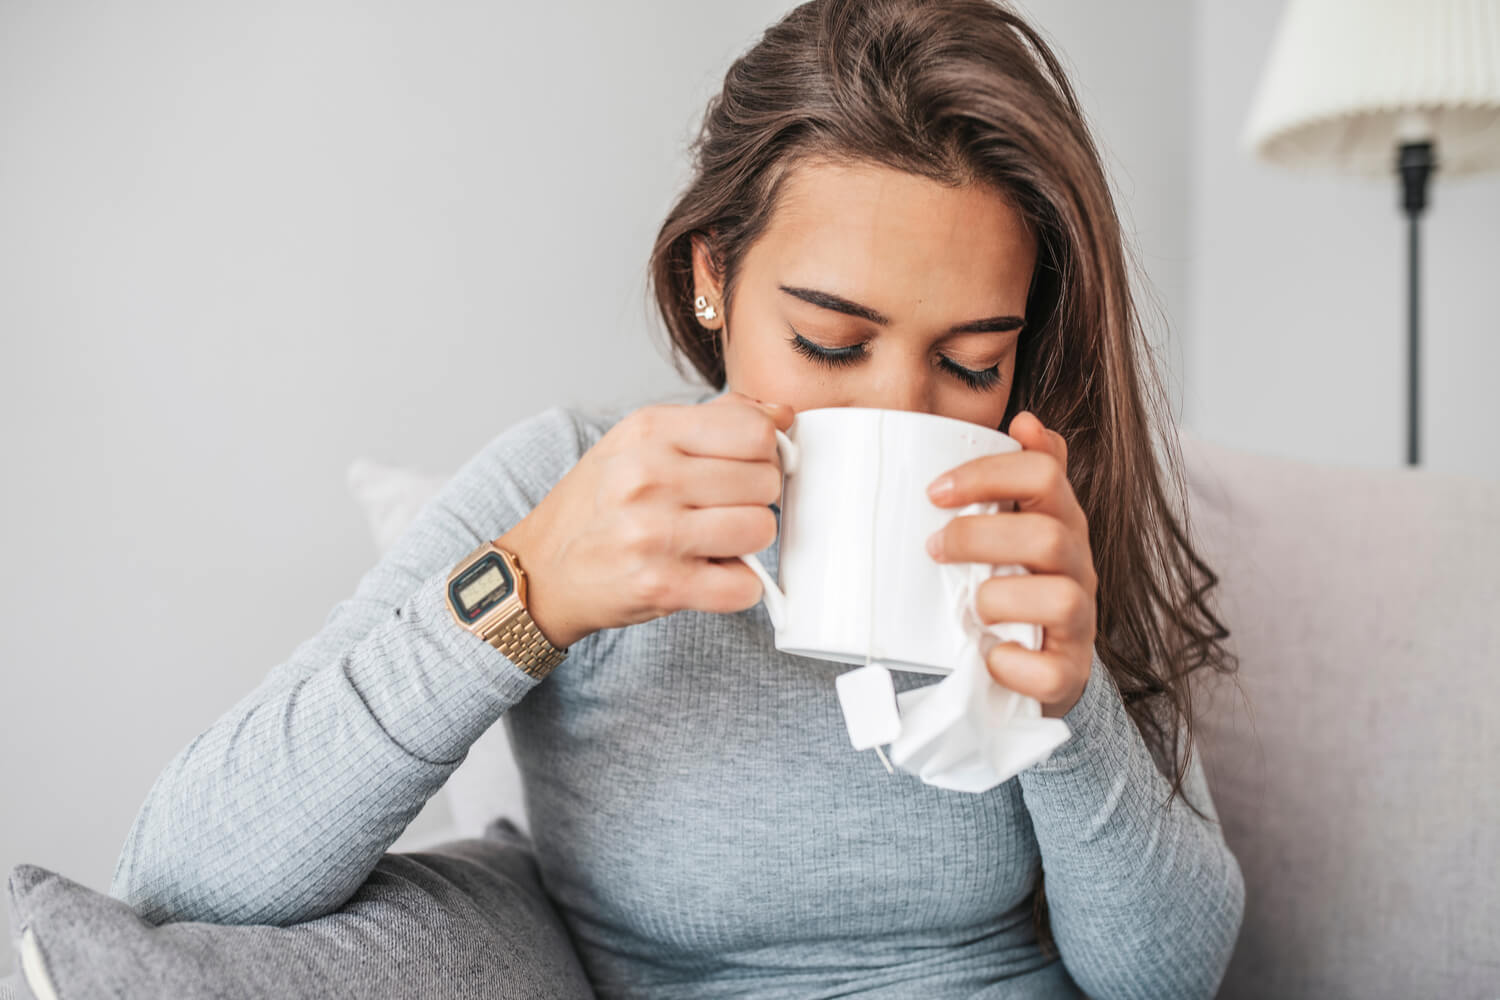 Woman drinking tea on the couch in the winter as she recovers from vascular surgery